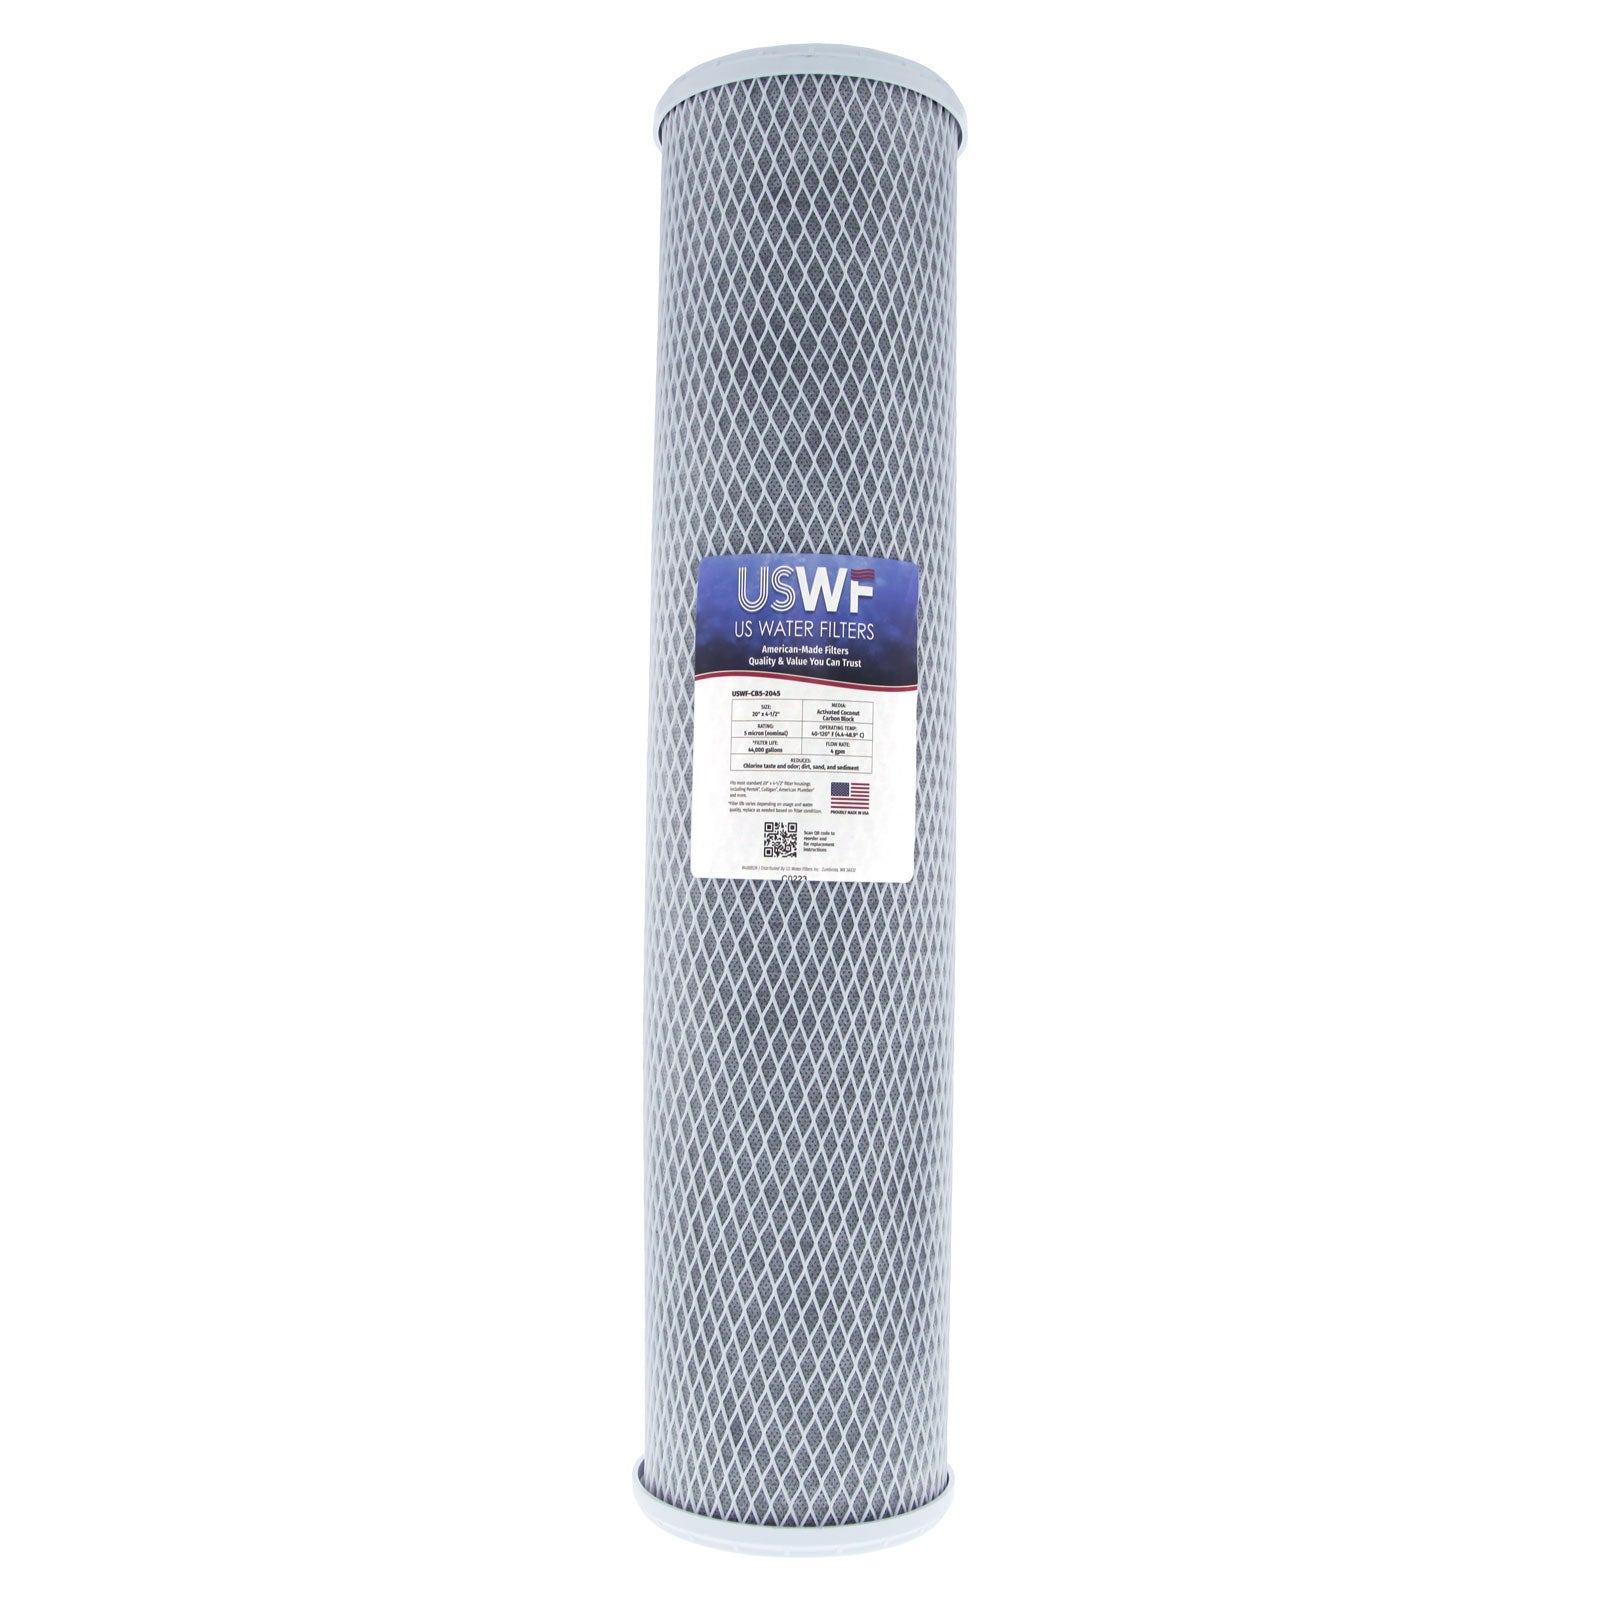 2-Stage CTO(Chlorine Taste and Odor) Reduction Whole House Water Filtration System by USWF, Sediment and CTO Reduction Carbon Block, 1" Inlet/Outlet